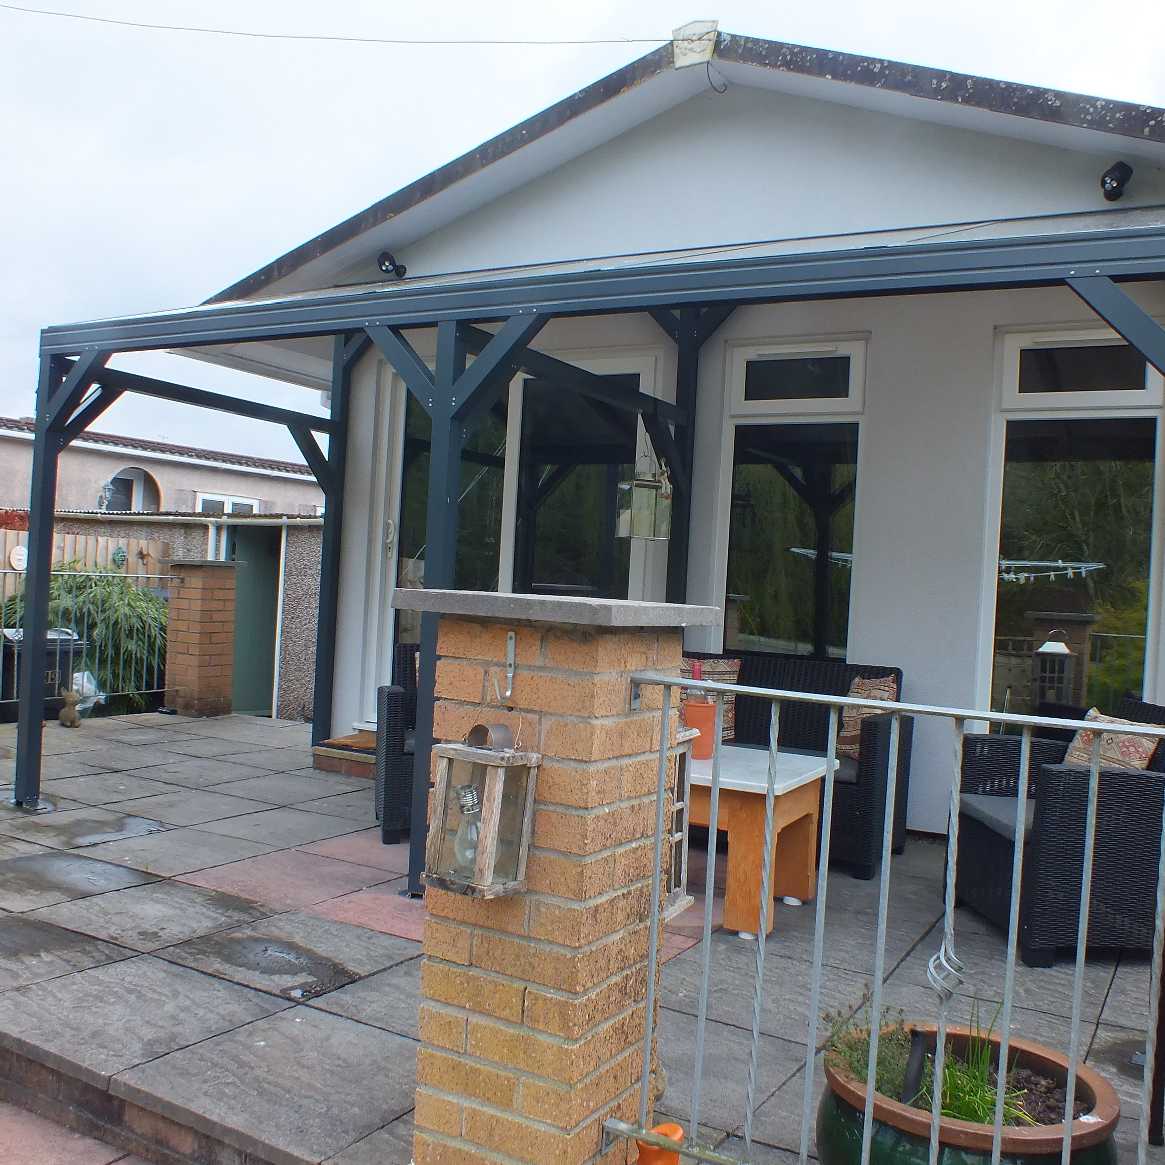 Buy Omega Smart Free-Standing, Anthracite Grey MonoPitch Roof Canopy with 16mm Polycarbonate Glazing - 5.6m (W) x 3.5m (P), (6) Supporting Posts online today